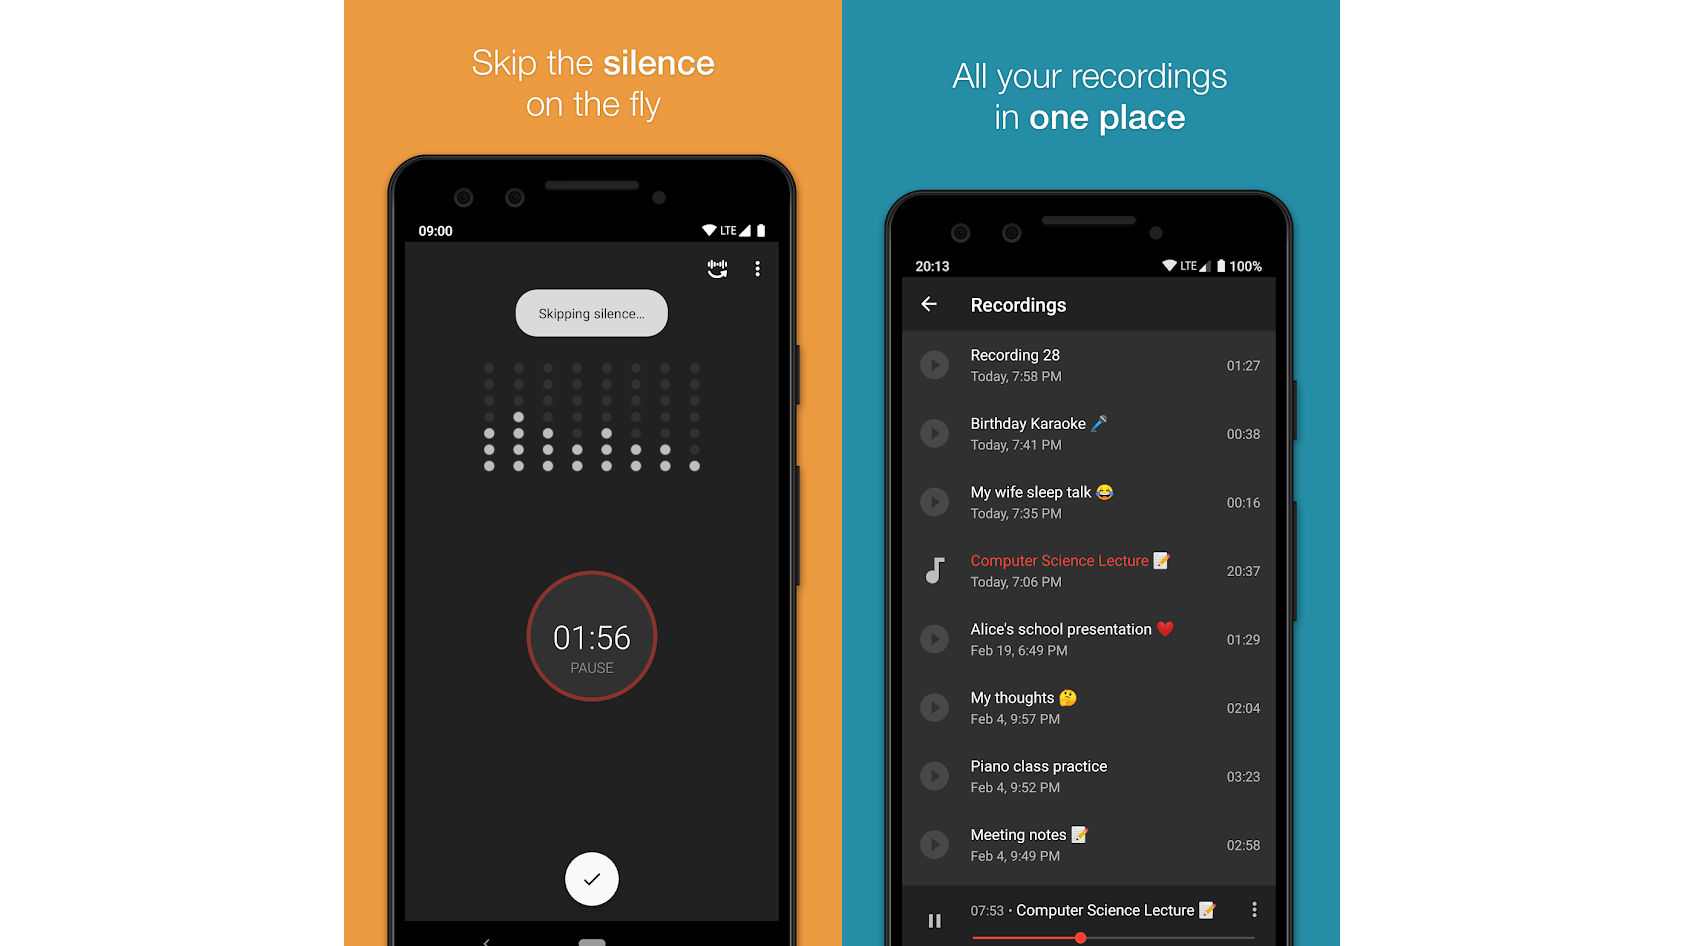 The Smart Recorder App interface depicting animated levels and a list of recordings on smartphone screens.